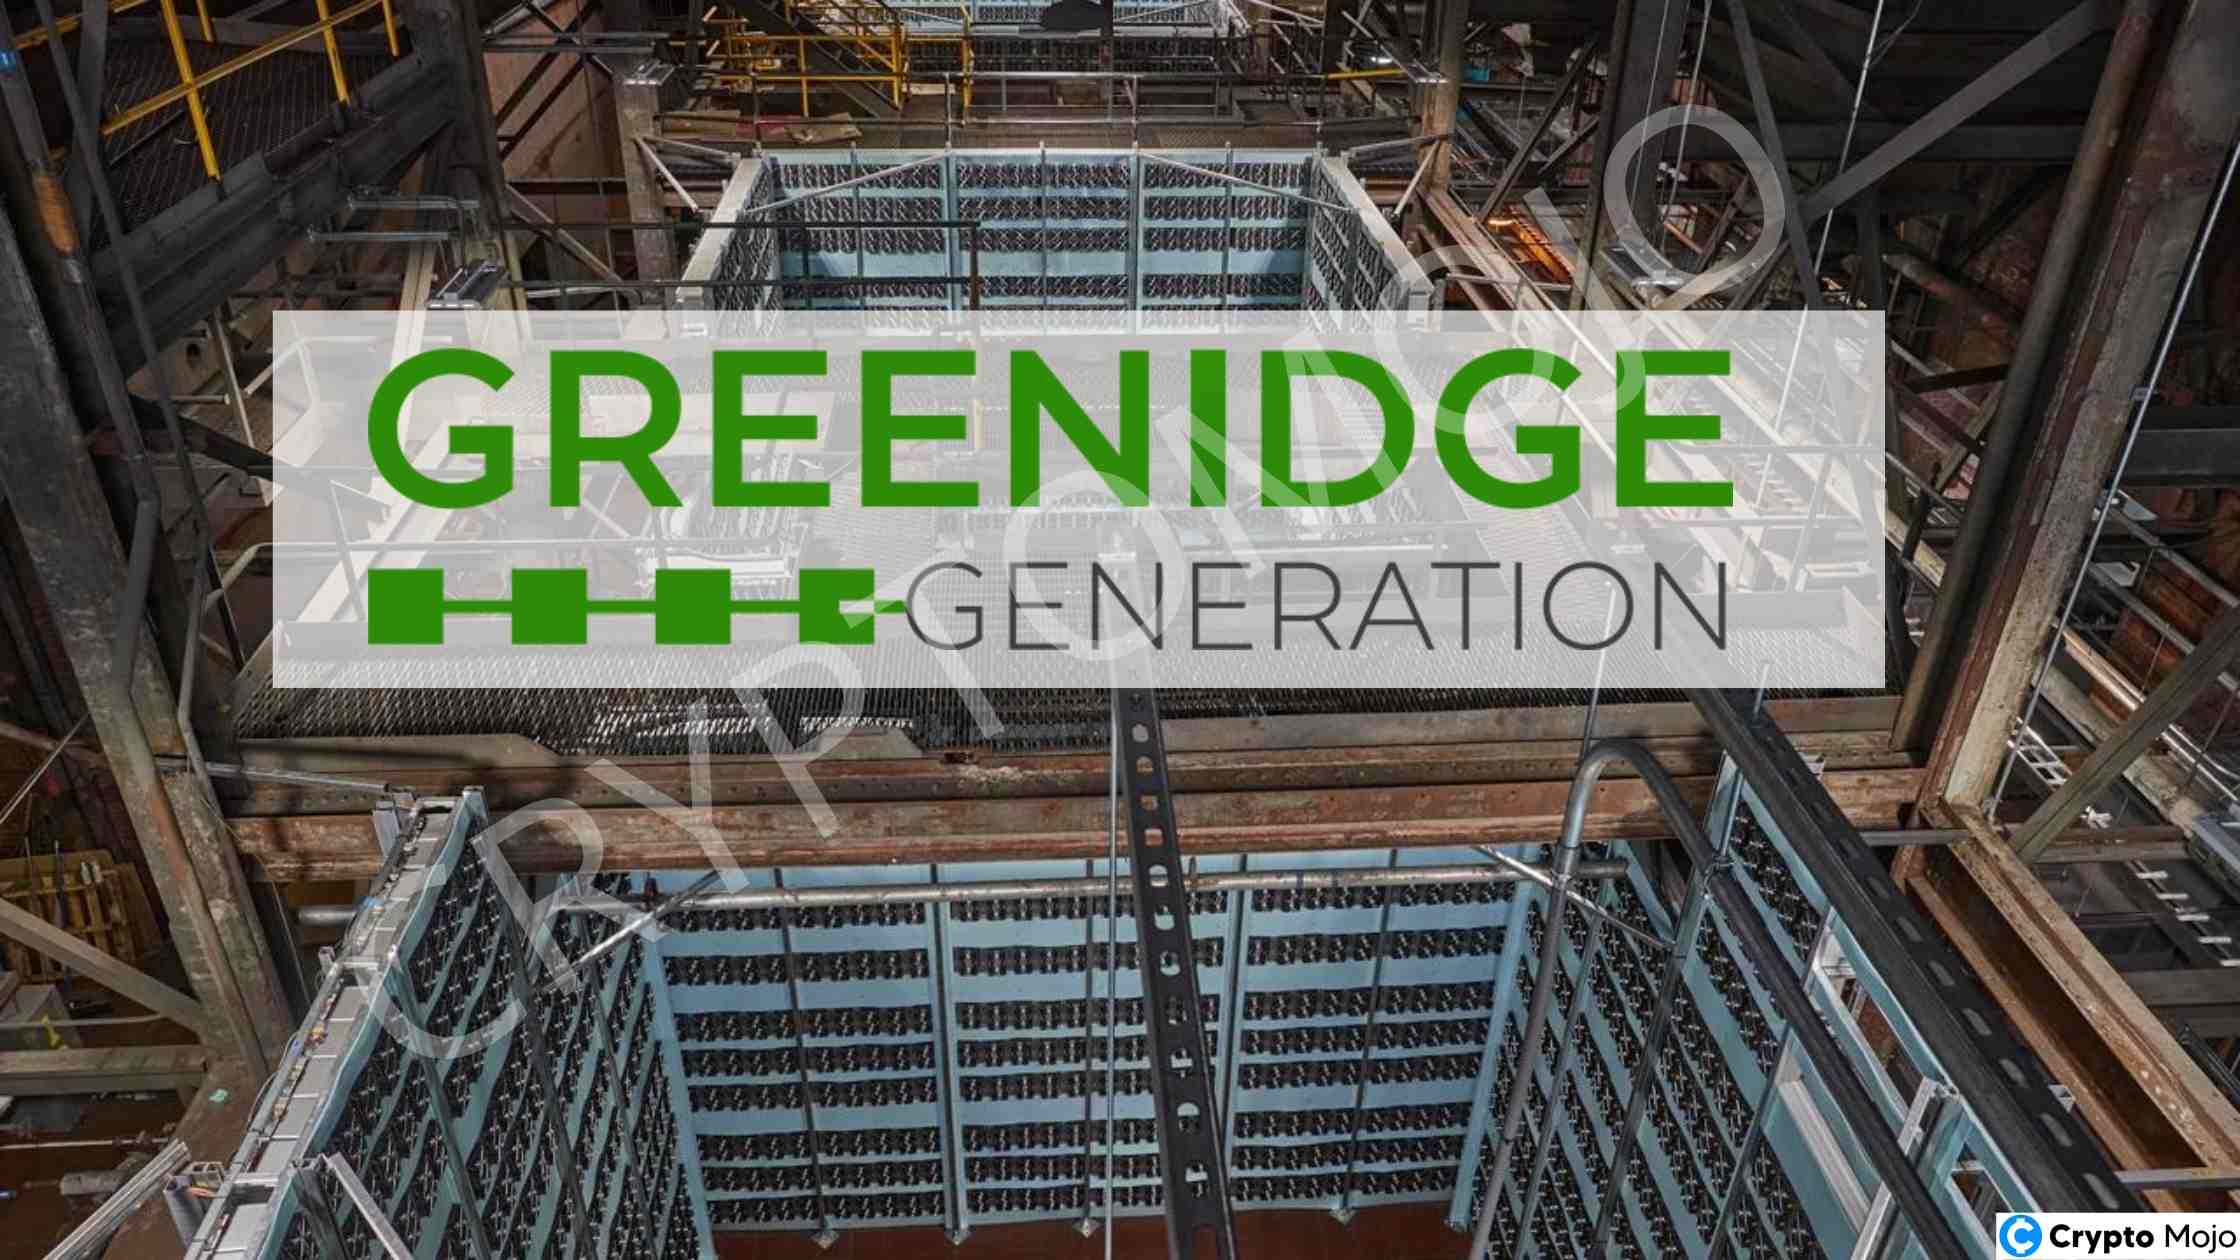 Shares Of Bitcoin Miner Greenidge Generation Decline As Revenues Fall Short Of Expectations!